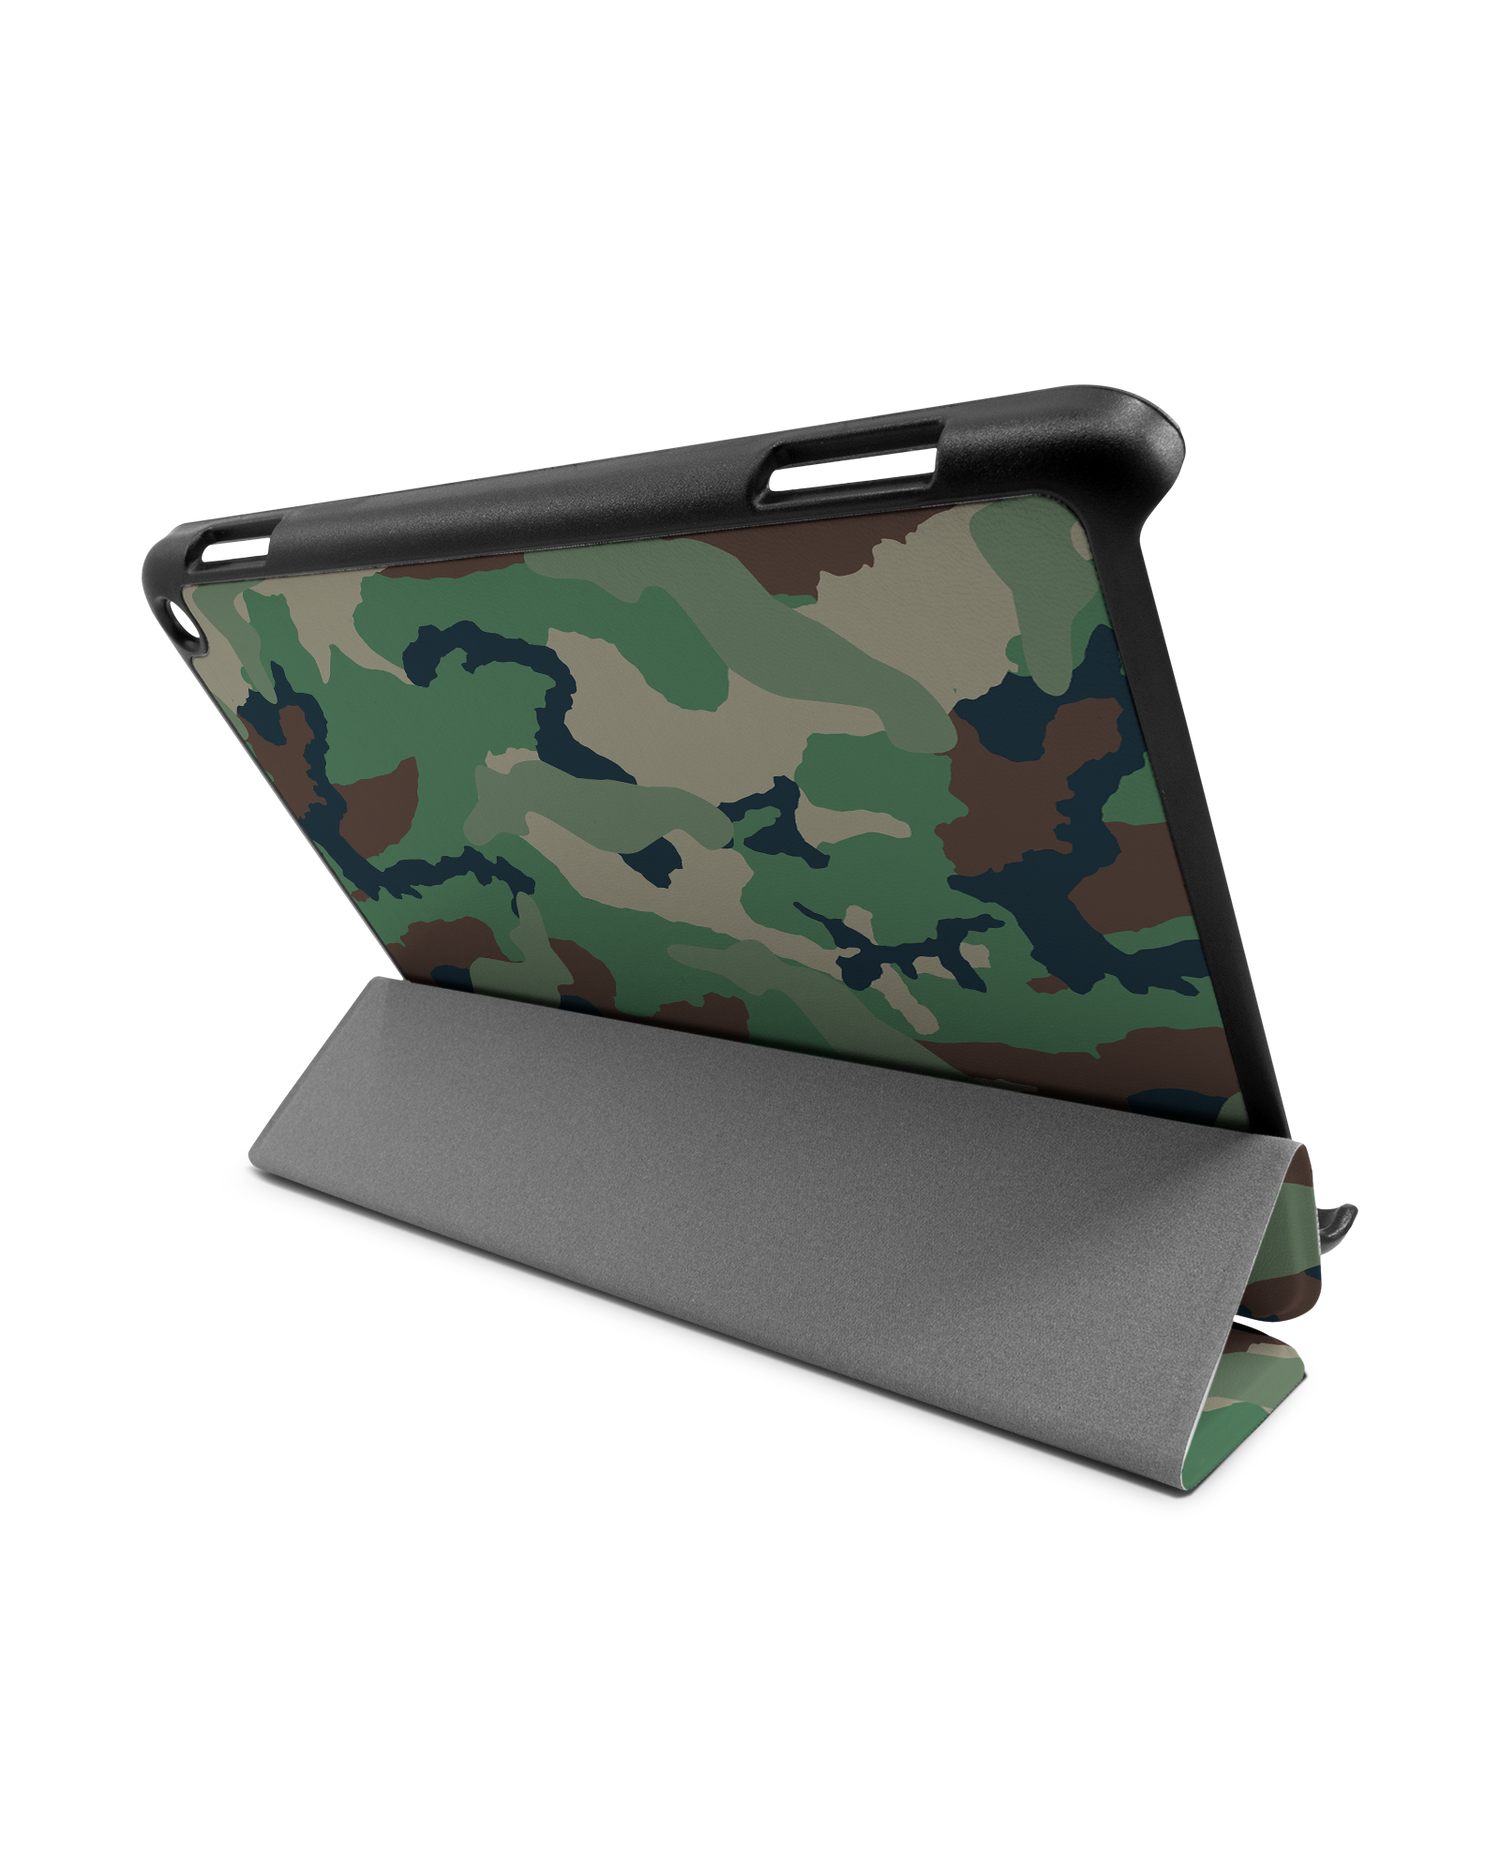 Green and Brown Camo Tablet Smart Case für Amazon Fire HD 8 (2022), Amazon Fire HD 8 Plus (2022), Amazon Fire HD 8 (2020), Amazon Fire HD 8 Plus (2020): Aufgestellt im Querformat